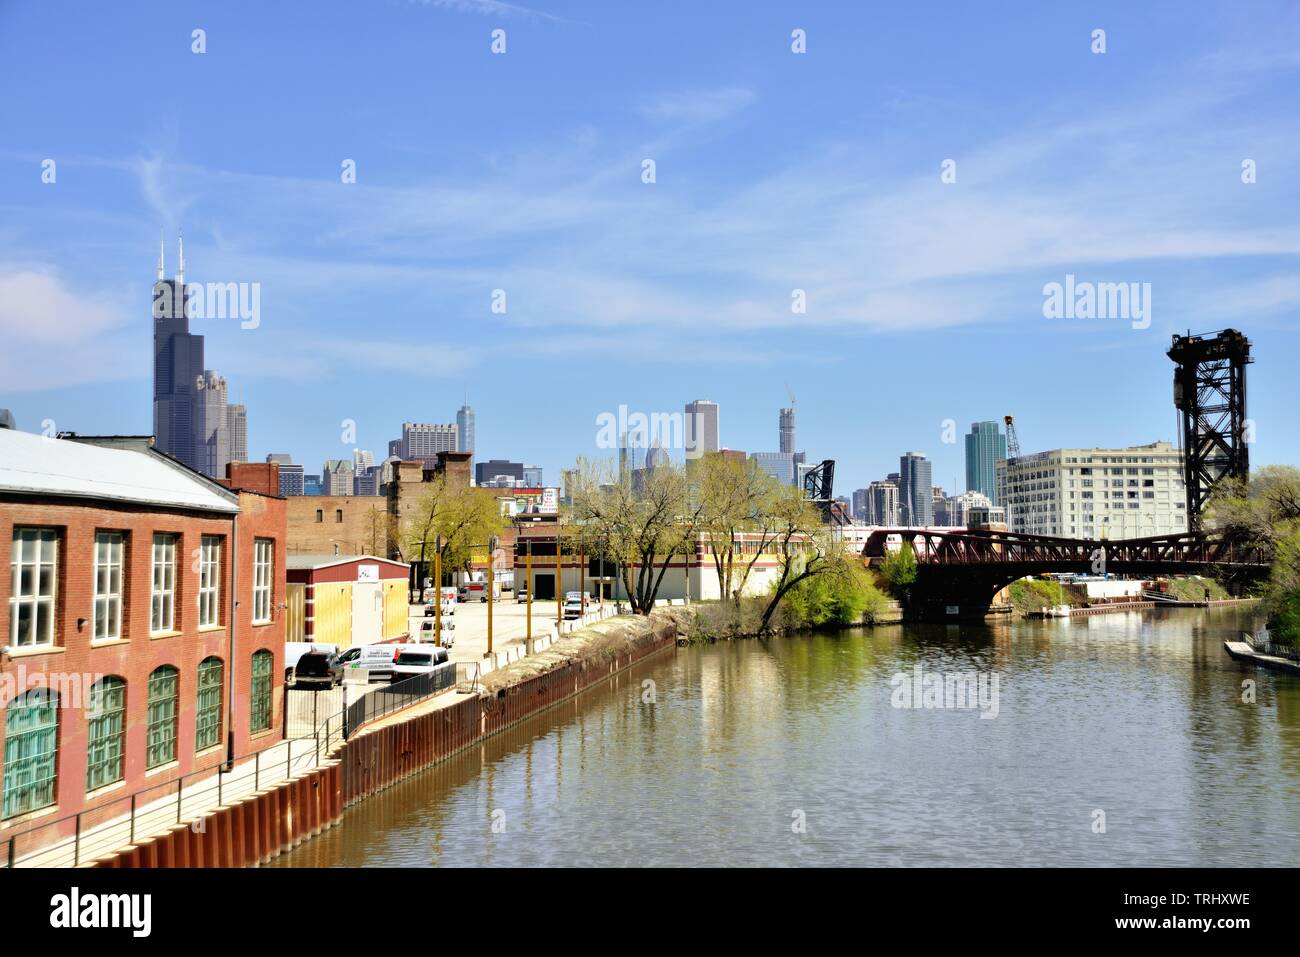 Chicago, Illinois, USA. The South Branch of the Chicago River on the city's South Side. The river flows through a large volume of industrial areas. Stock Photo